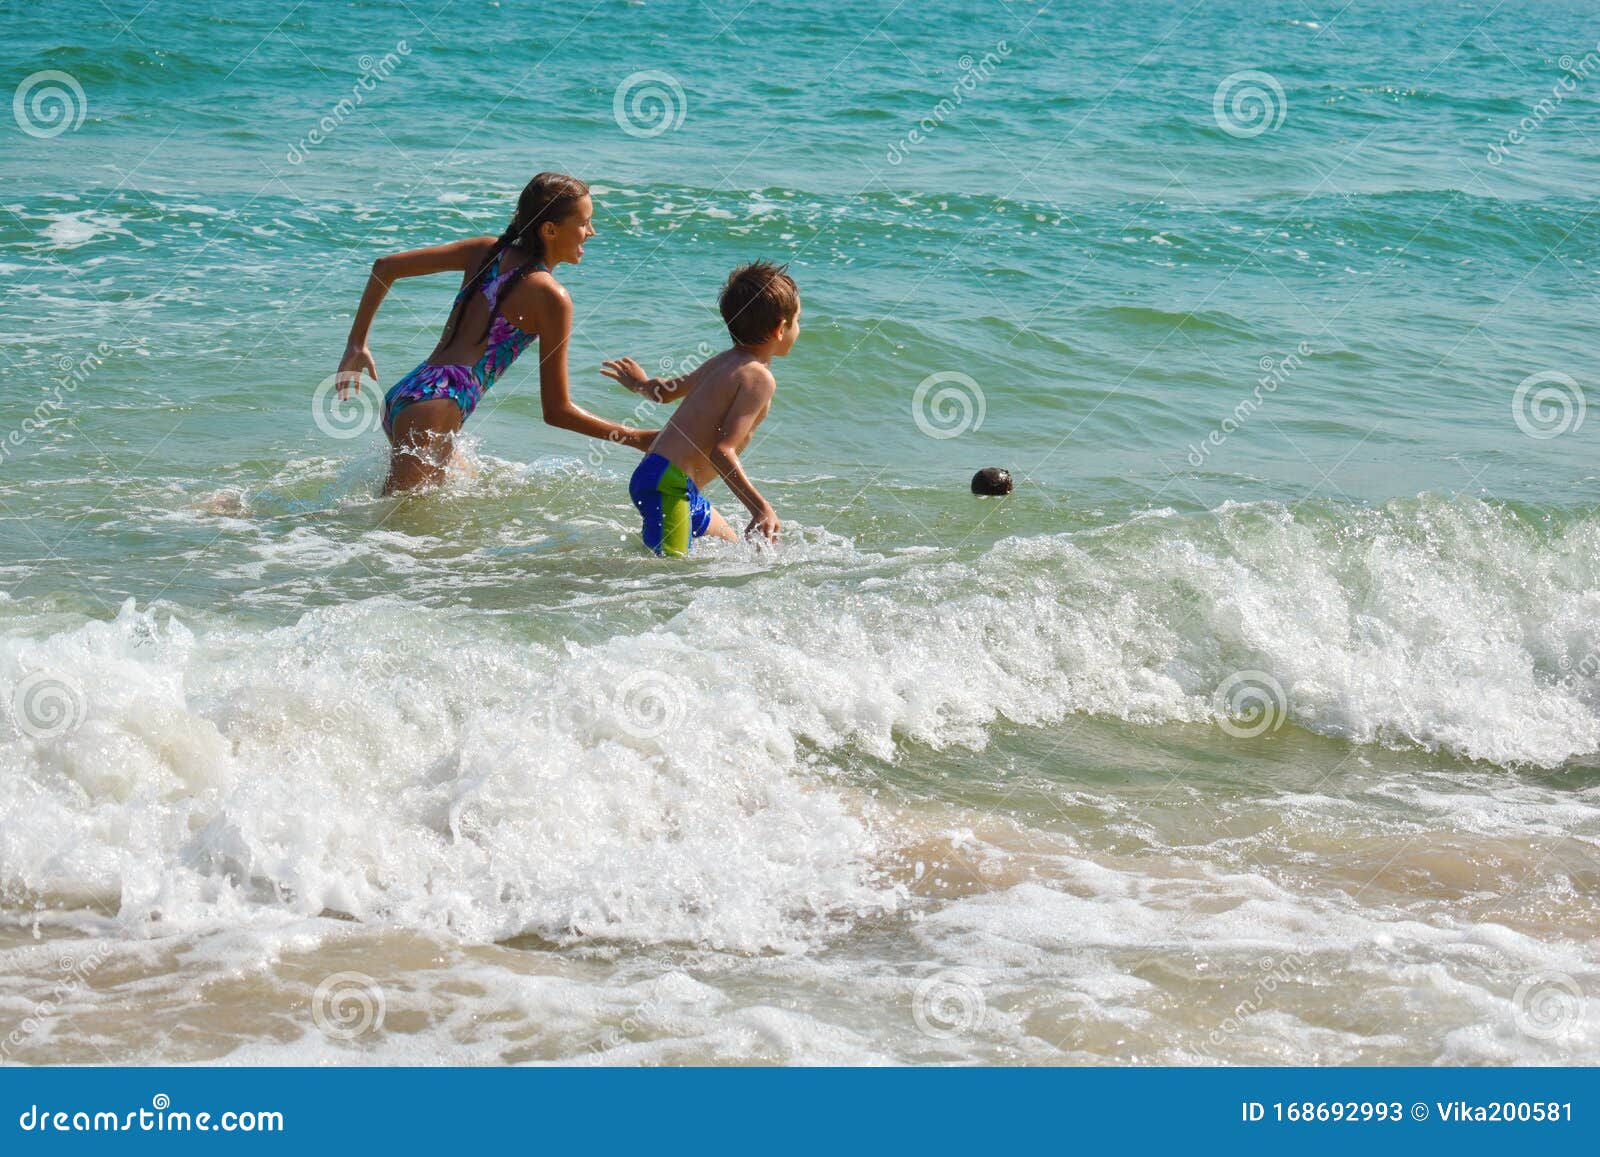 Funny Kids Playing in Sea. the Boys Splashing in Sea Water. Family ...